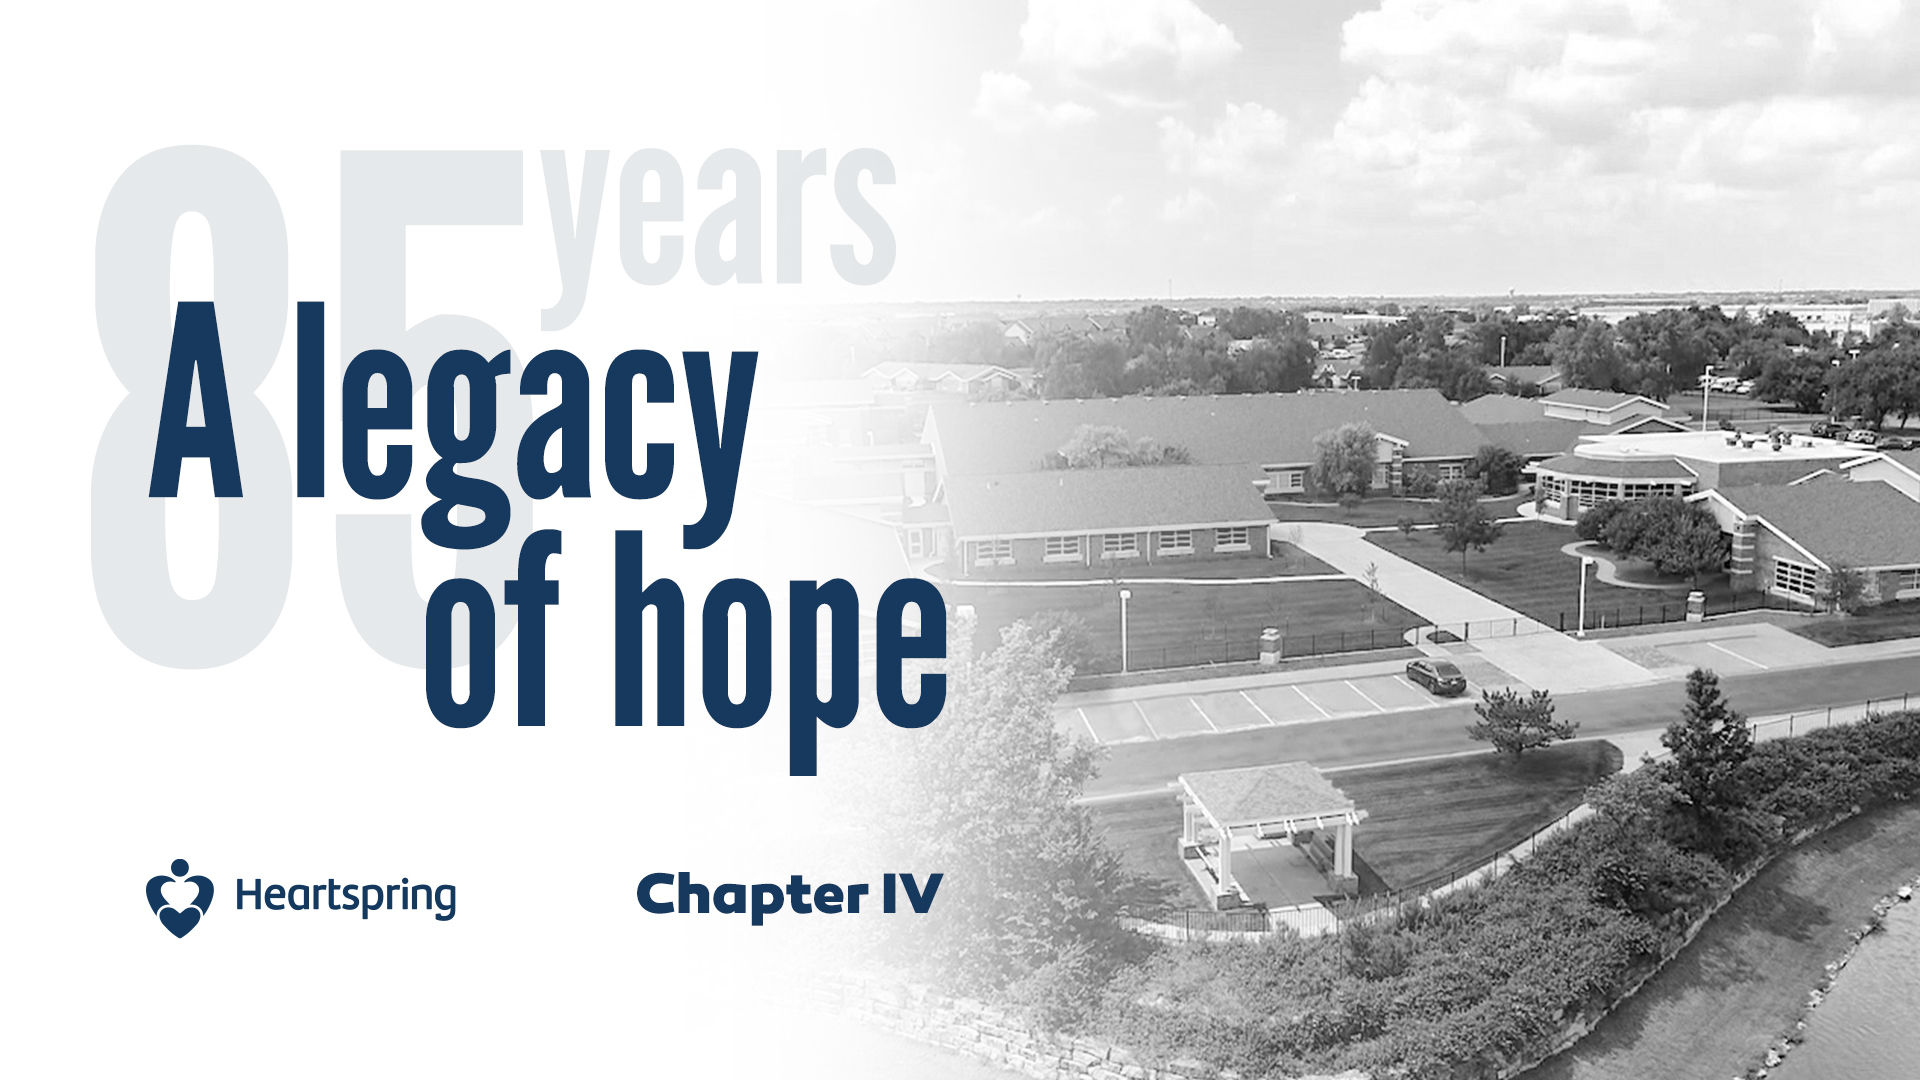 Chapter IV: 85 Years A Legacy of Hope